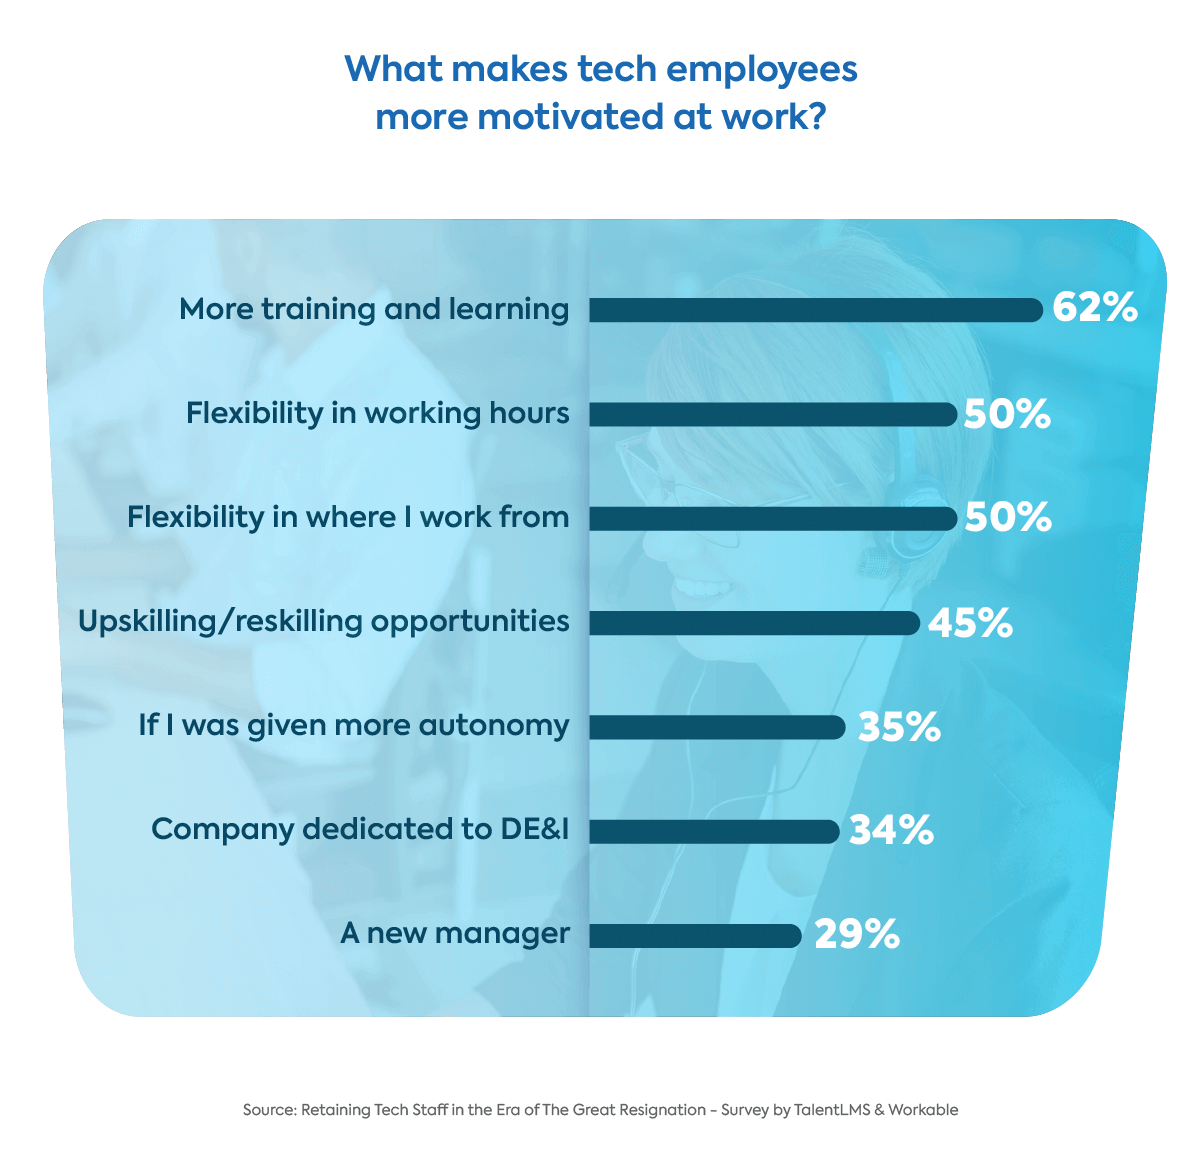 In a survey commissioned by Workable and TalentLMS, 91% of tech workers want more learning opportunities from their current employers and 58% cited “skills development” as one criteria in choosing who they want to work for. It’s also a top motivator for tech employees.